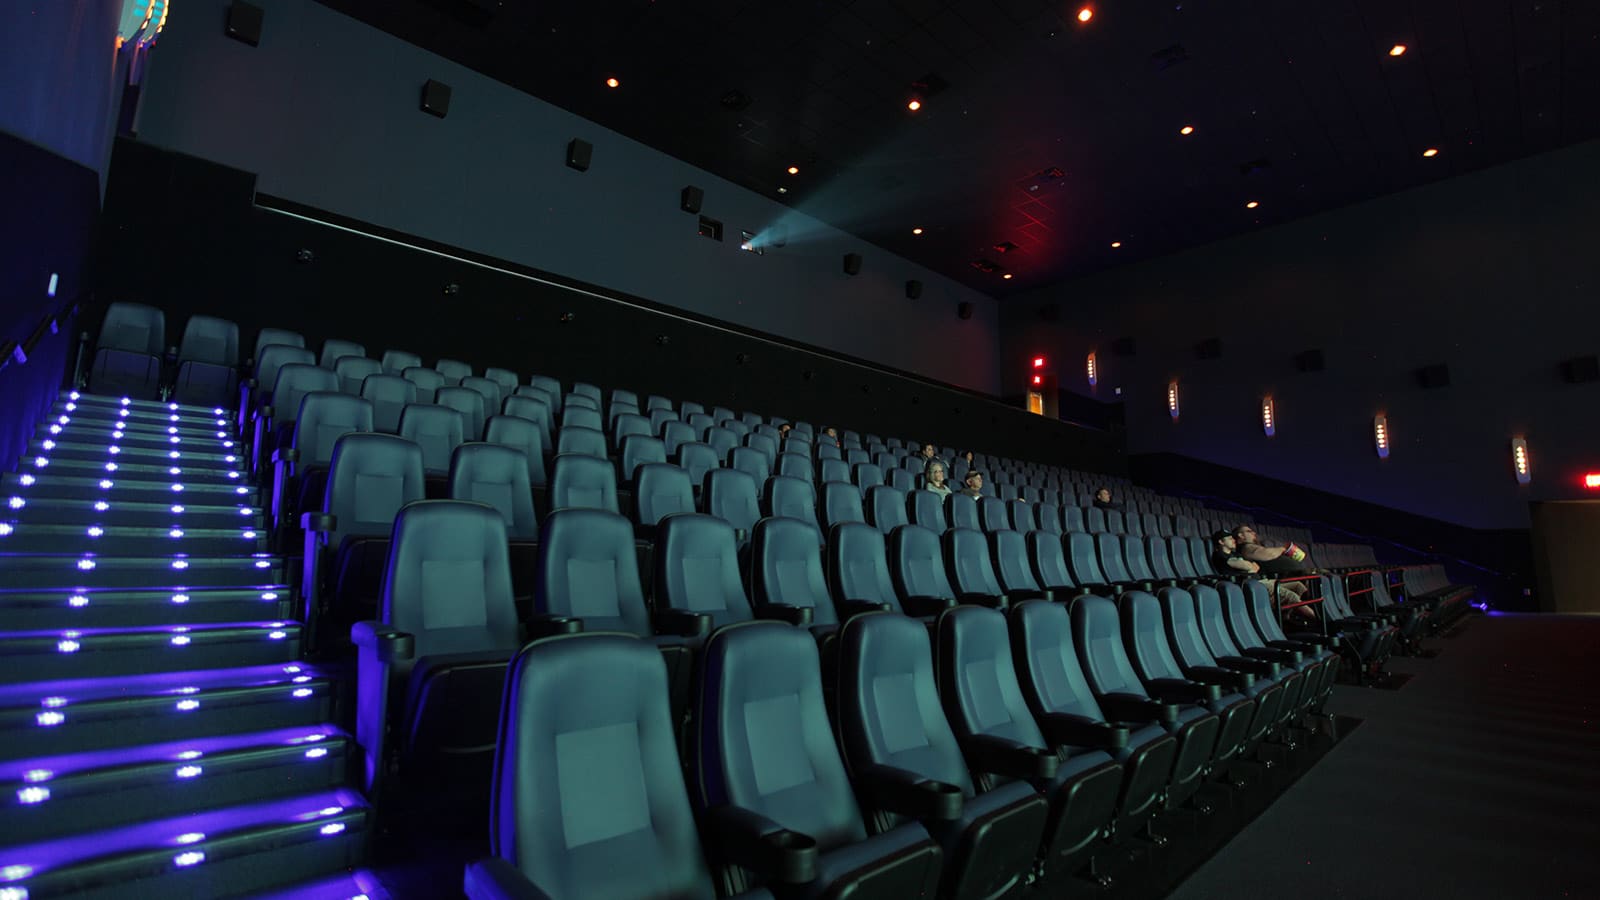 Meyer Sound EXP Powers Atmos & Three More GXL Theatres at Cinetopia Vancouver Mall